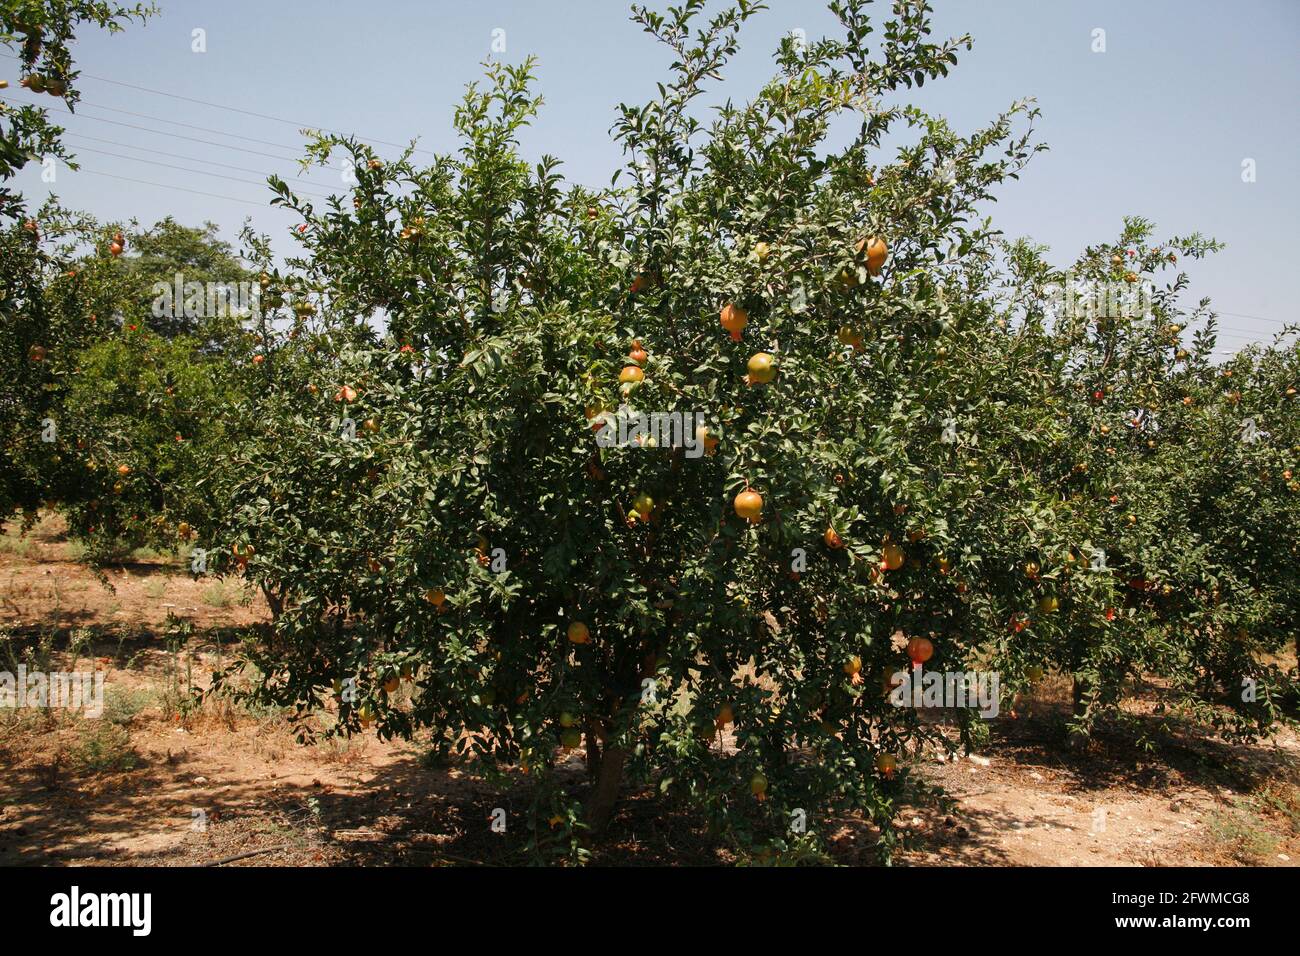 Orchard of Pomegranate Trees with ripe fruit on them in the Shephelah Hills, Lowlands or Judean Foothills near Sha'ar Hagai and Latrun. Israel Stock Photo